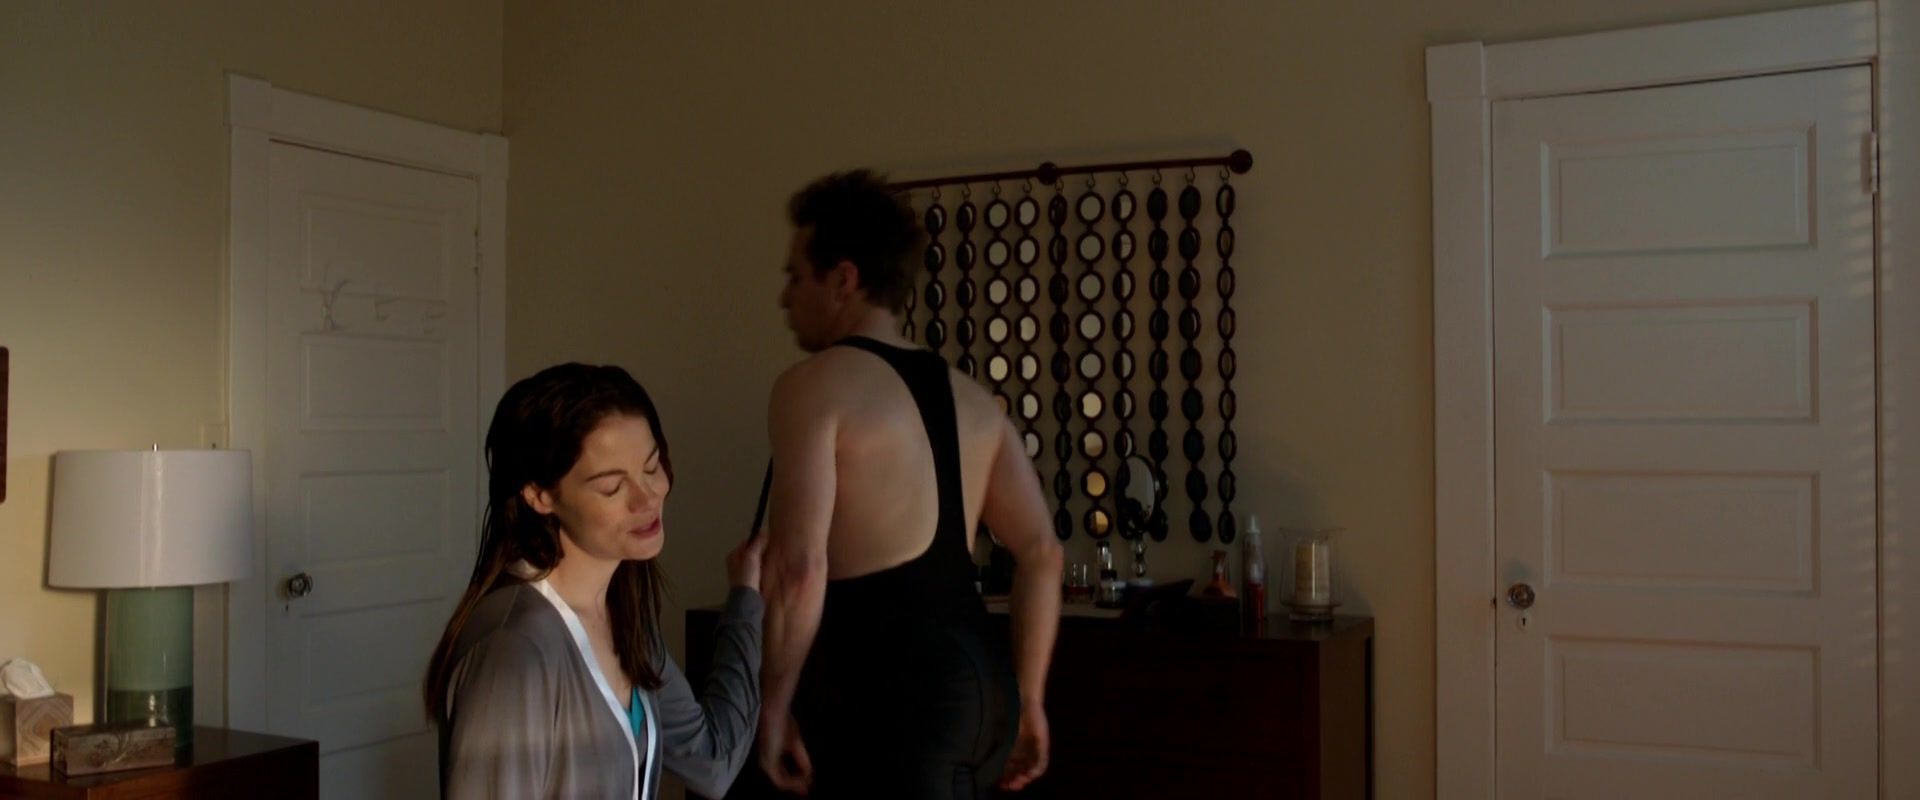 Big Dick Sexy Olivia Wilde, Michelle Monaghan nude - Better Living Through Chemistry (2014) Sexual Threesome